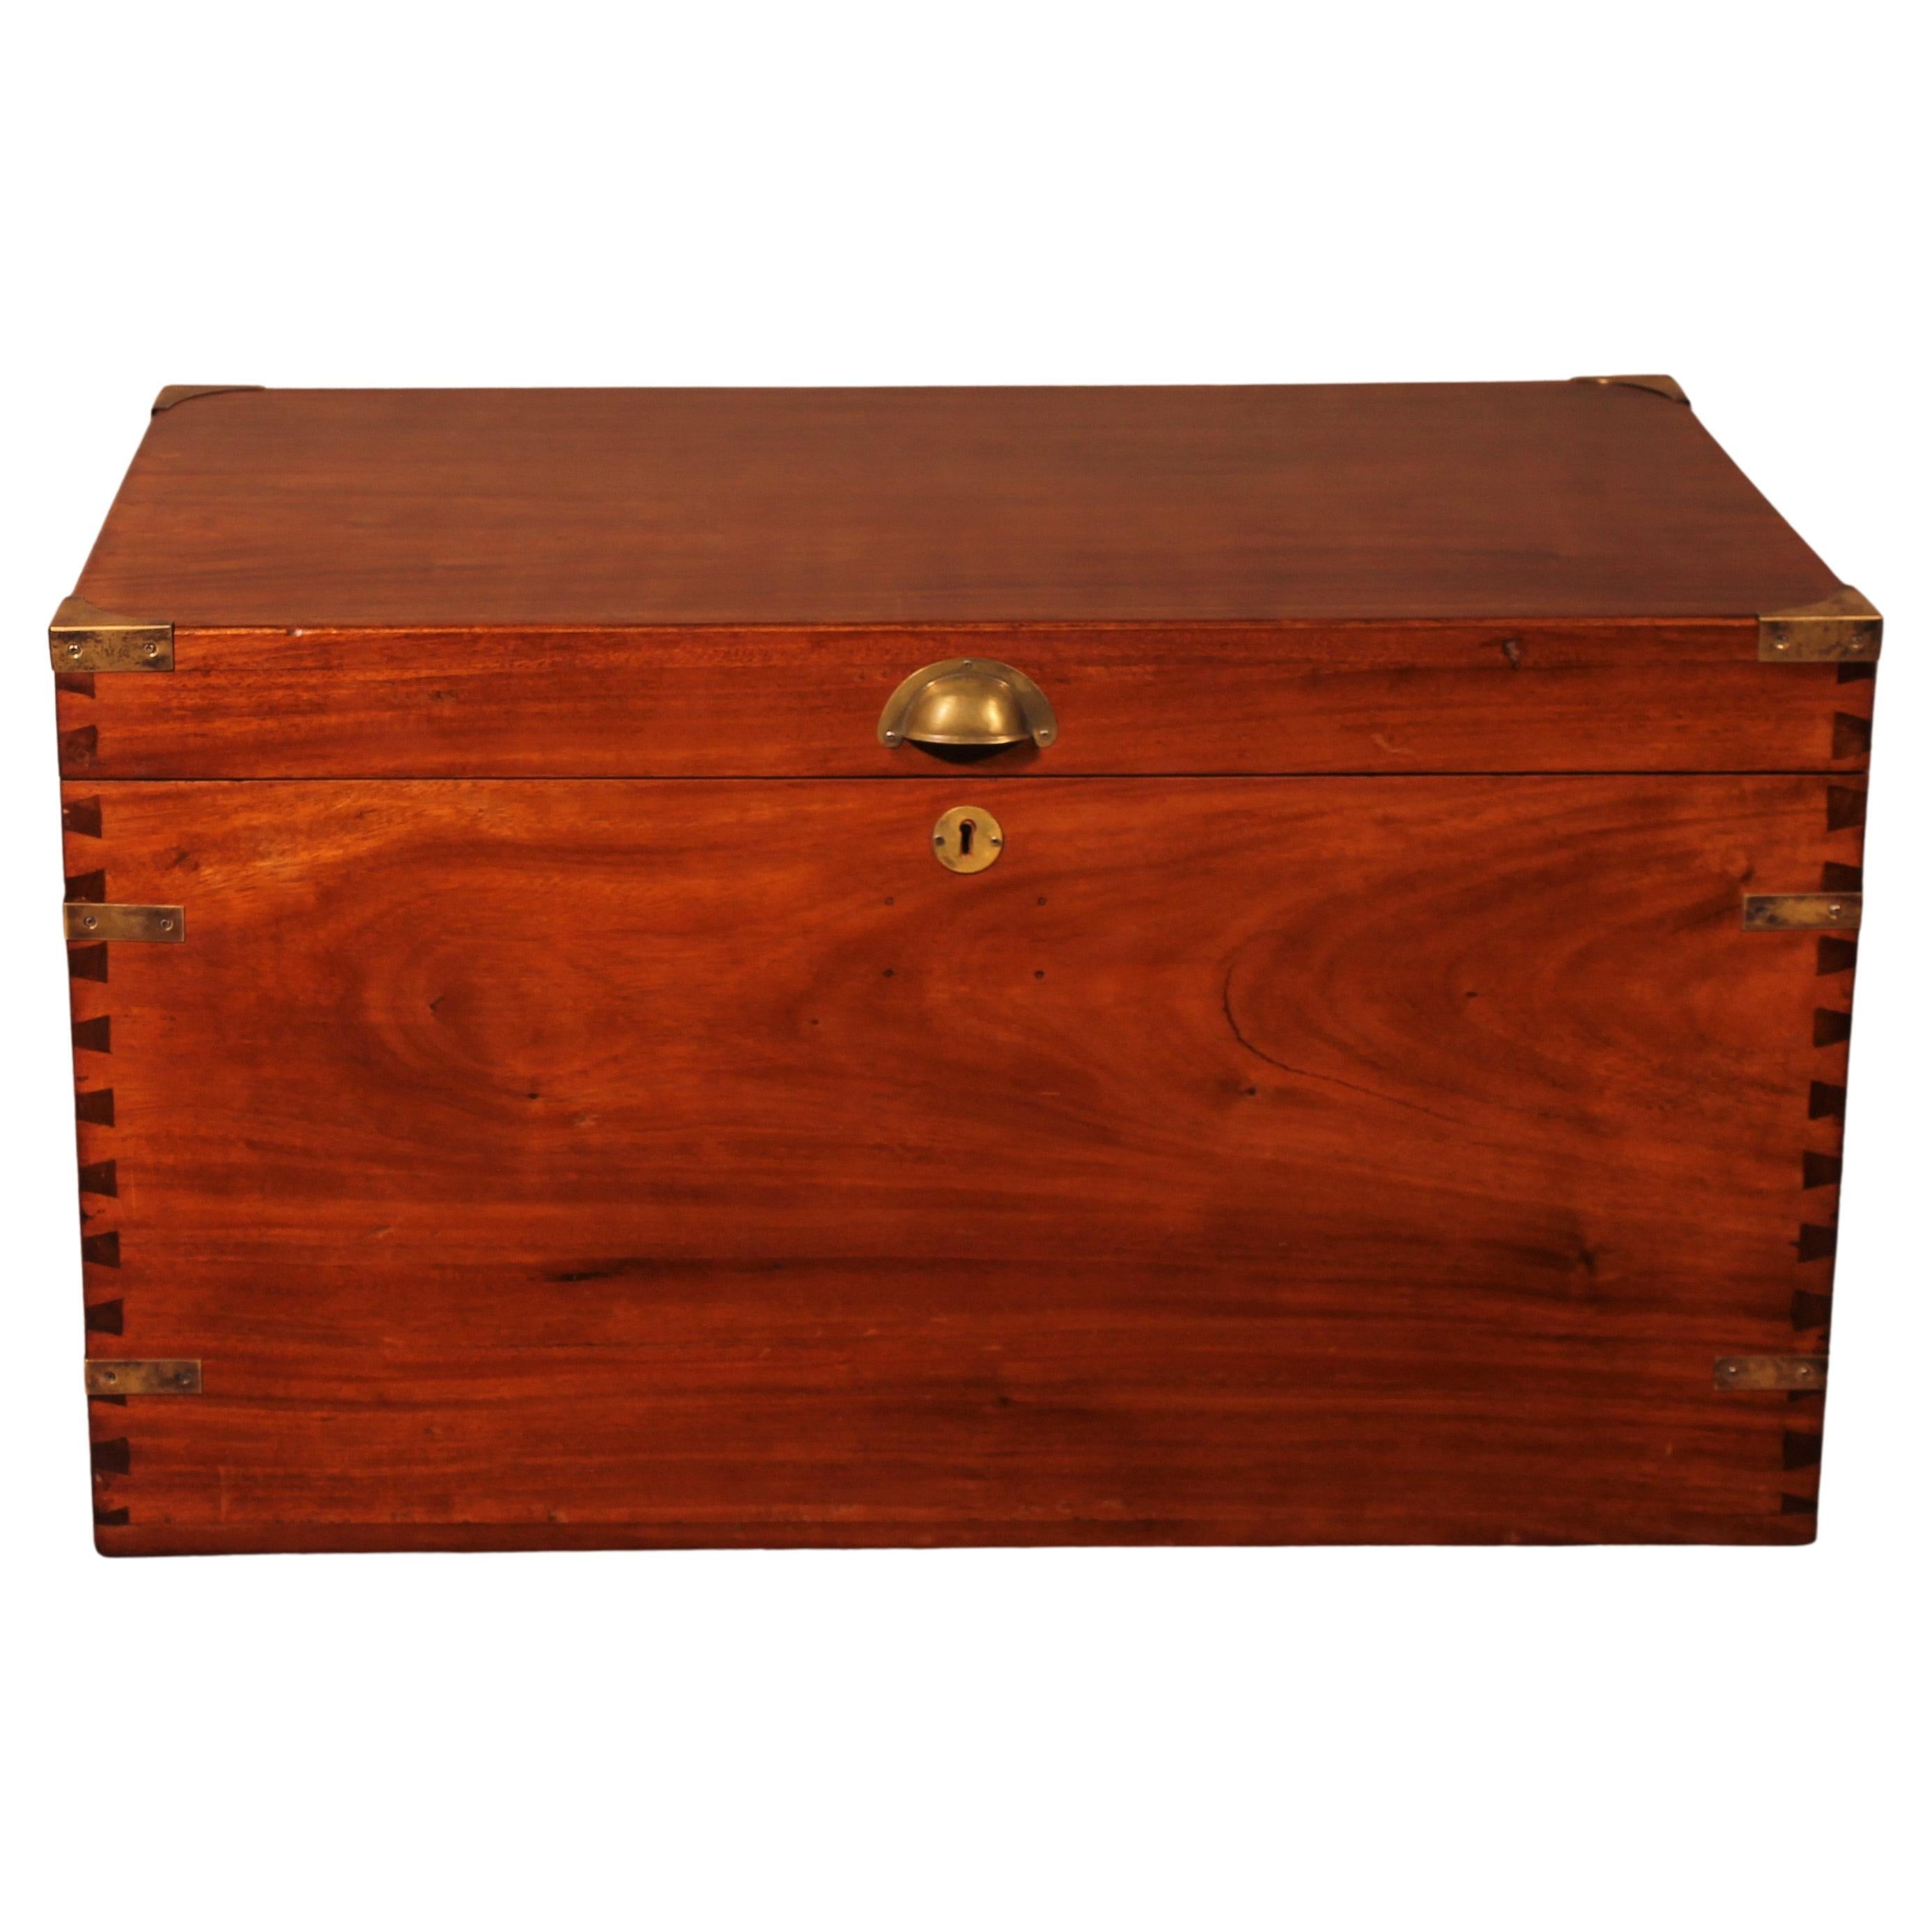 Campaign Chest or Marine Chest in Camphor Wood circa 1900, England